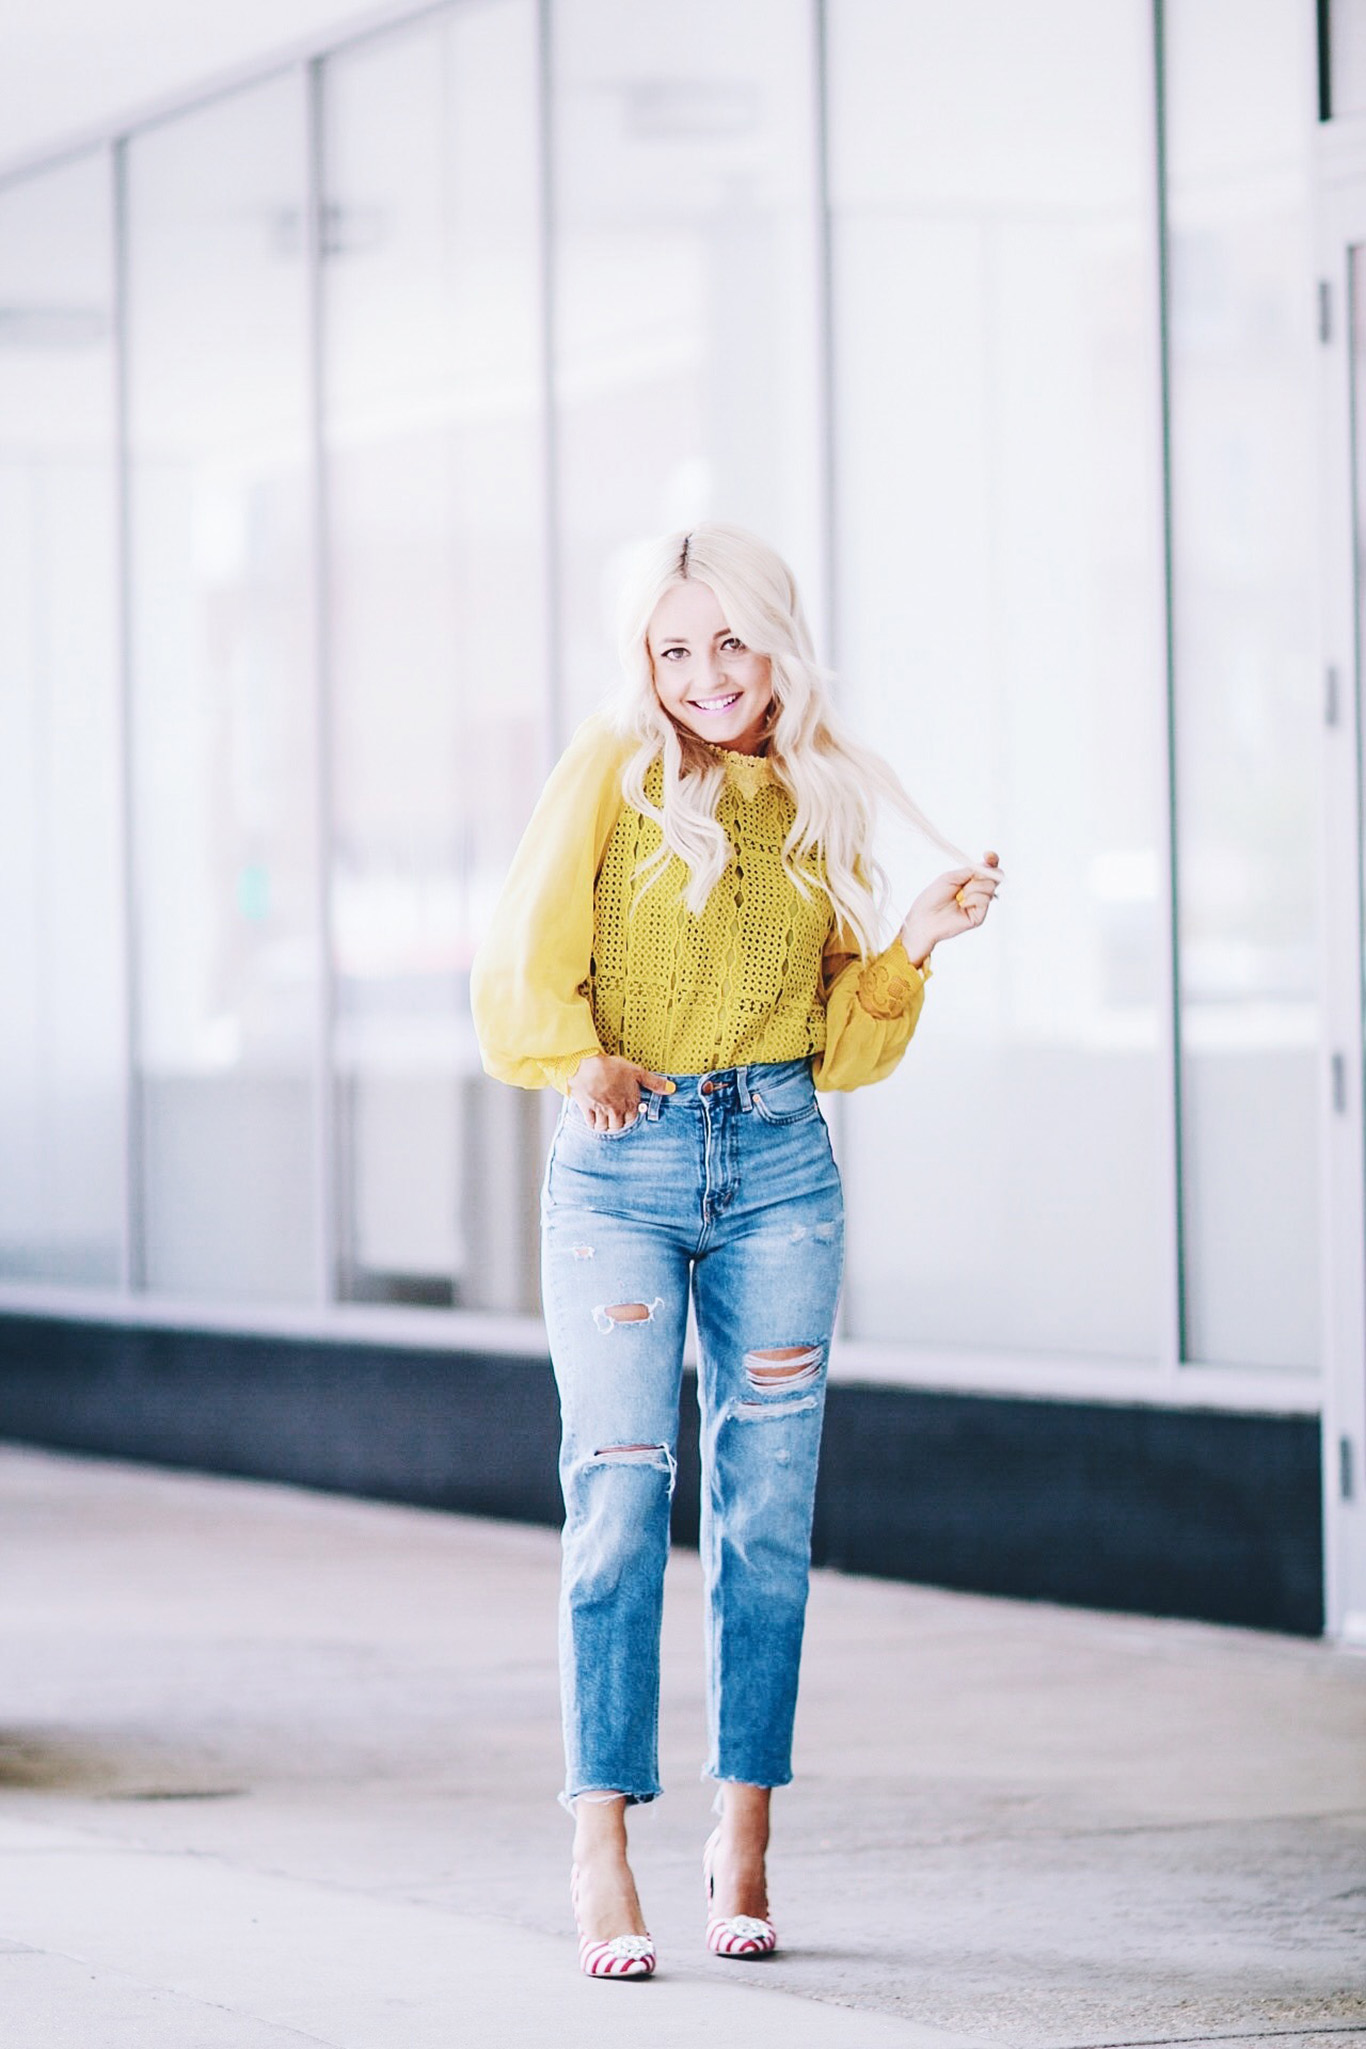 Alena Gidenko of modaprints.com styles a yellow lace top with high waisted mom jeans